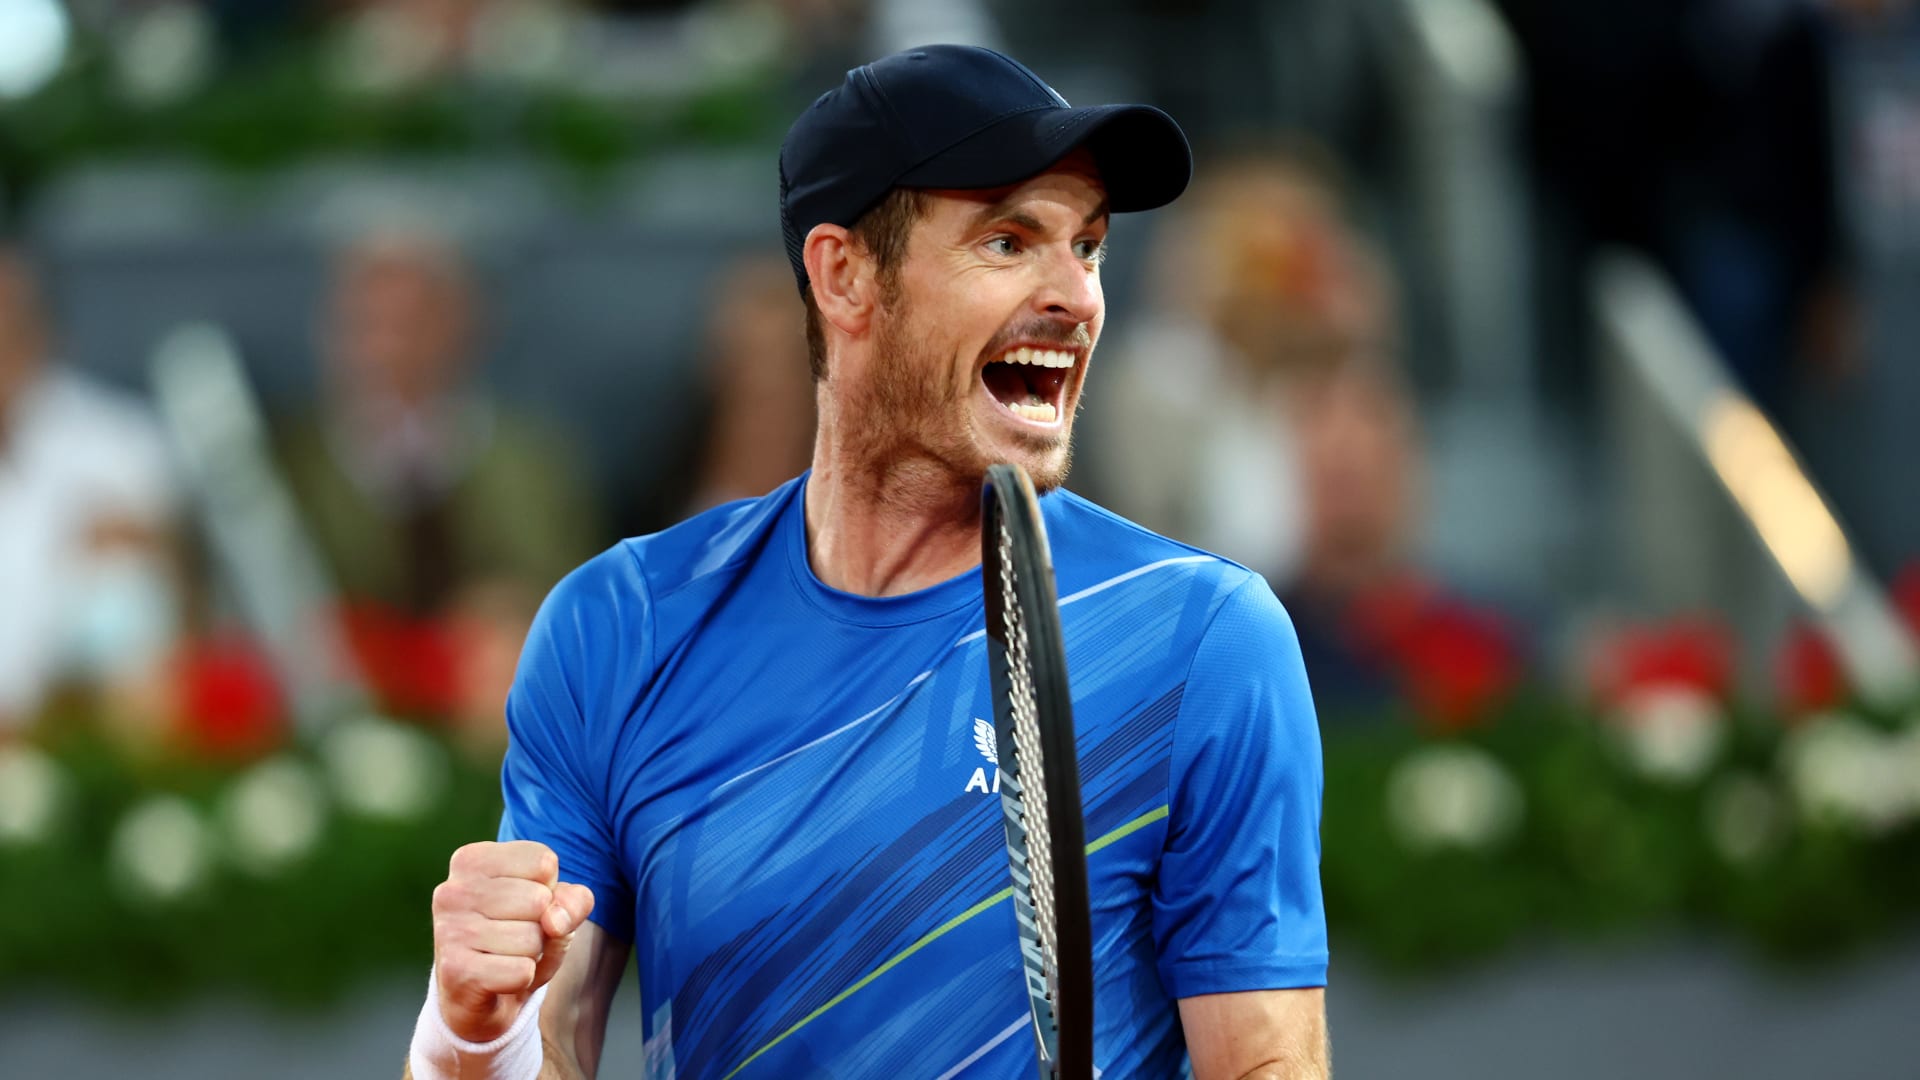 Andy Murray wins first match on clay in five years, gives opponent Thiem some comeback advice